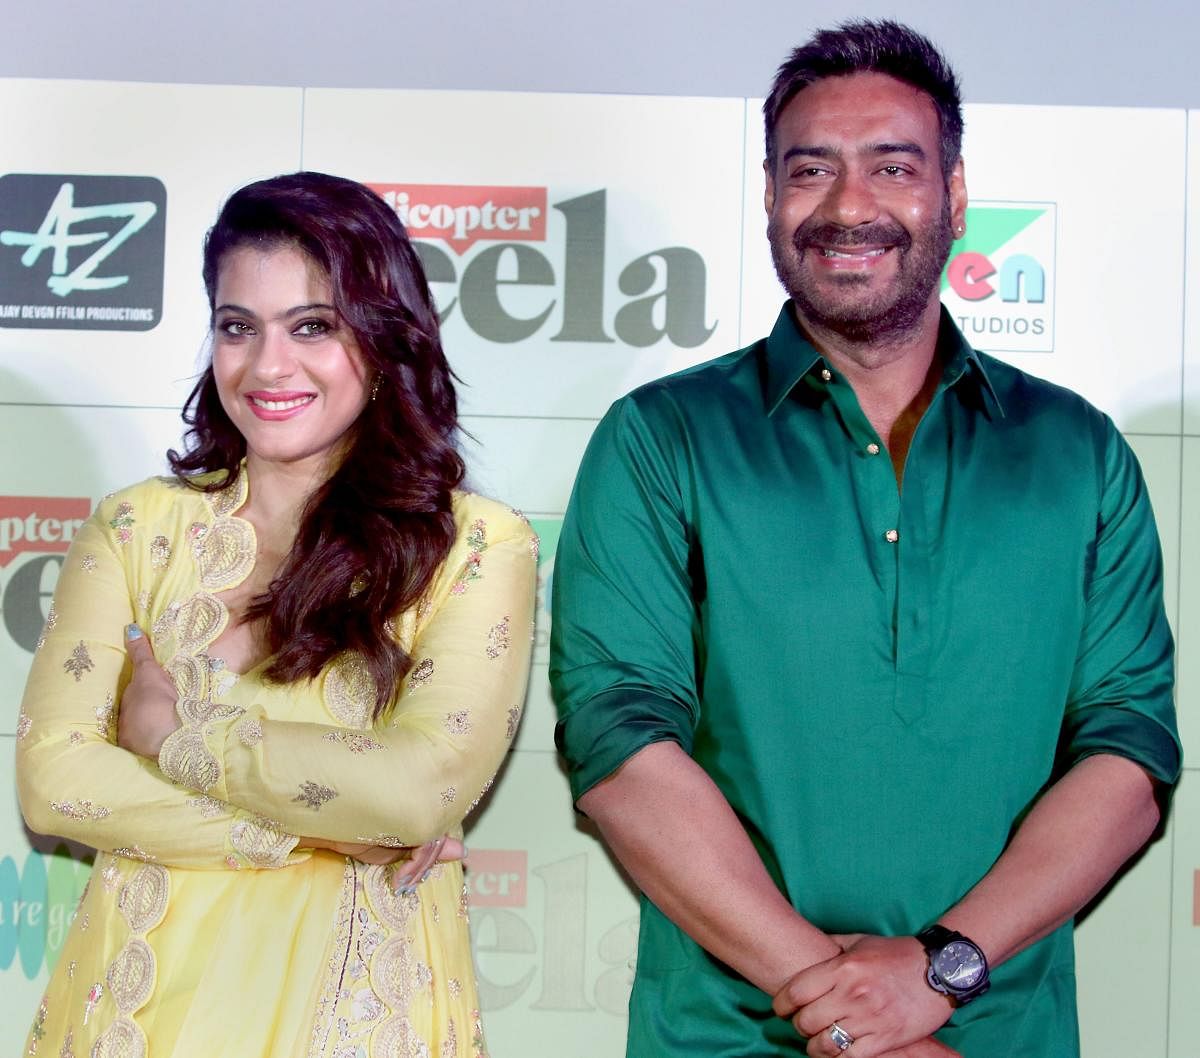 Bollywood actors Kajol Devgn and Ajay Devgn pose for a picture as they celebrate the formers 43rd birthday during the trailer launch of their upcoming Hindi film 'Helicopter Eela', in Mumbai on August 05, 2018. (PTI File Photo)